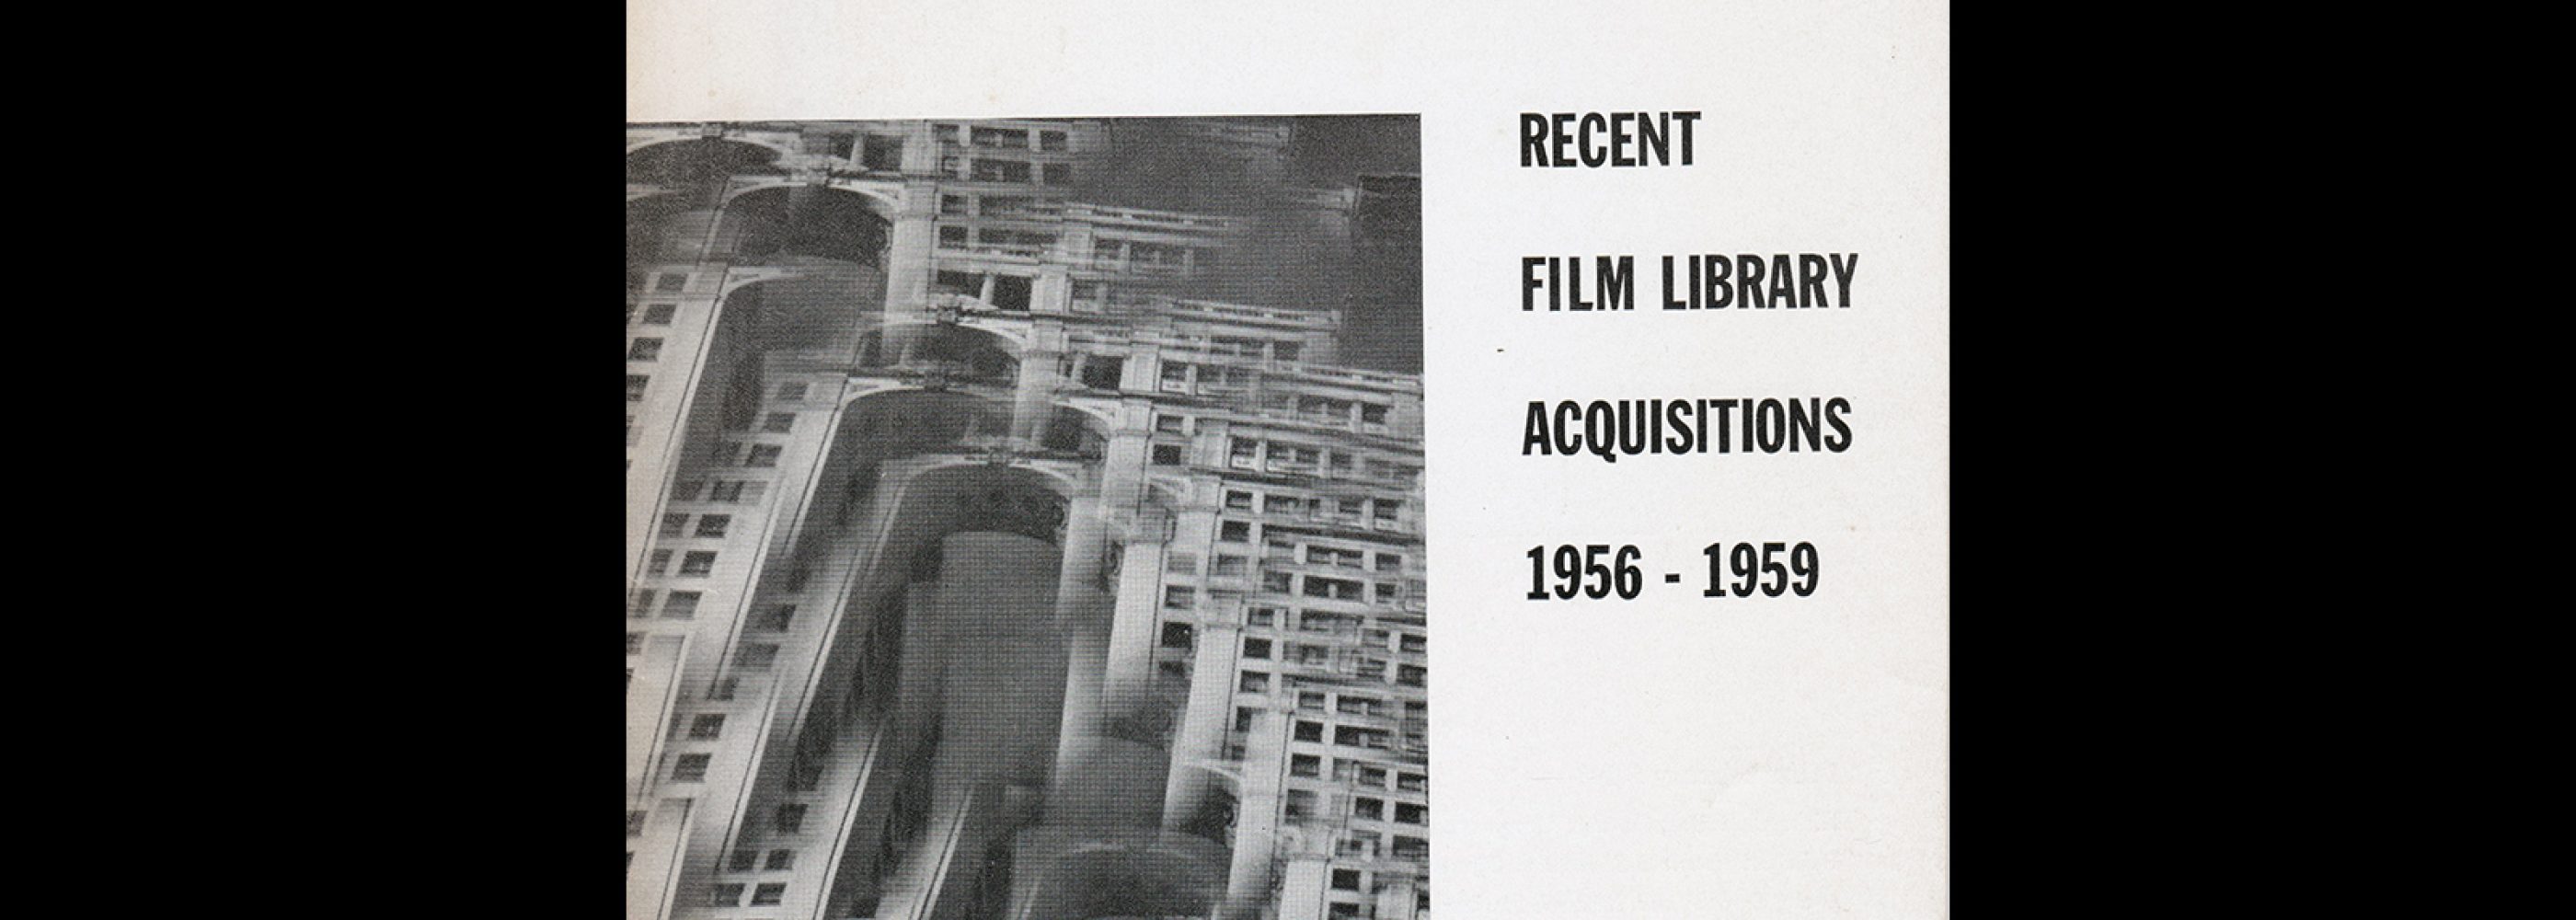 Recent Film Library Acquisitions 1956 - 1959, Museum of Modern Art, 1959